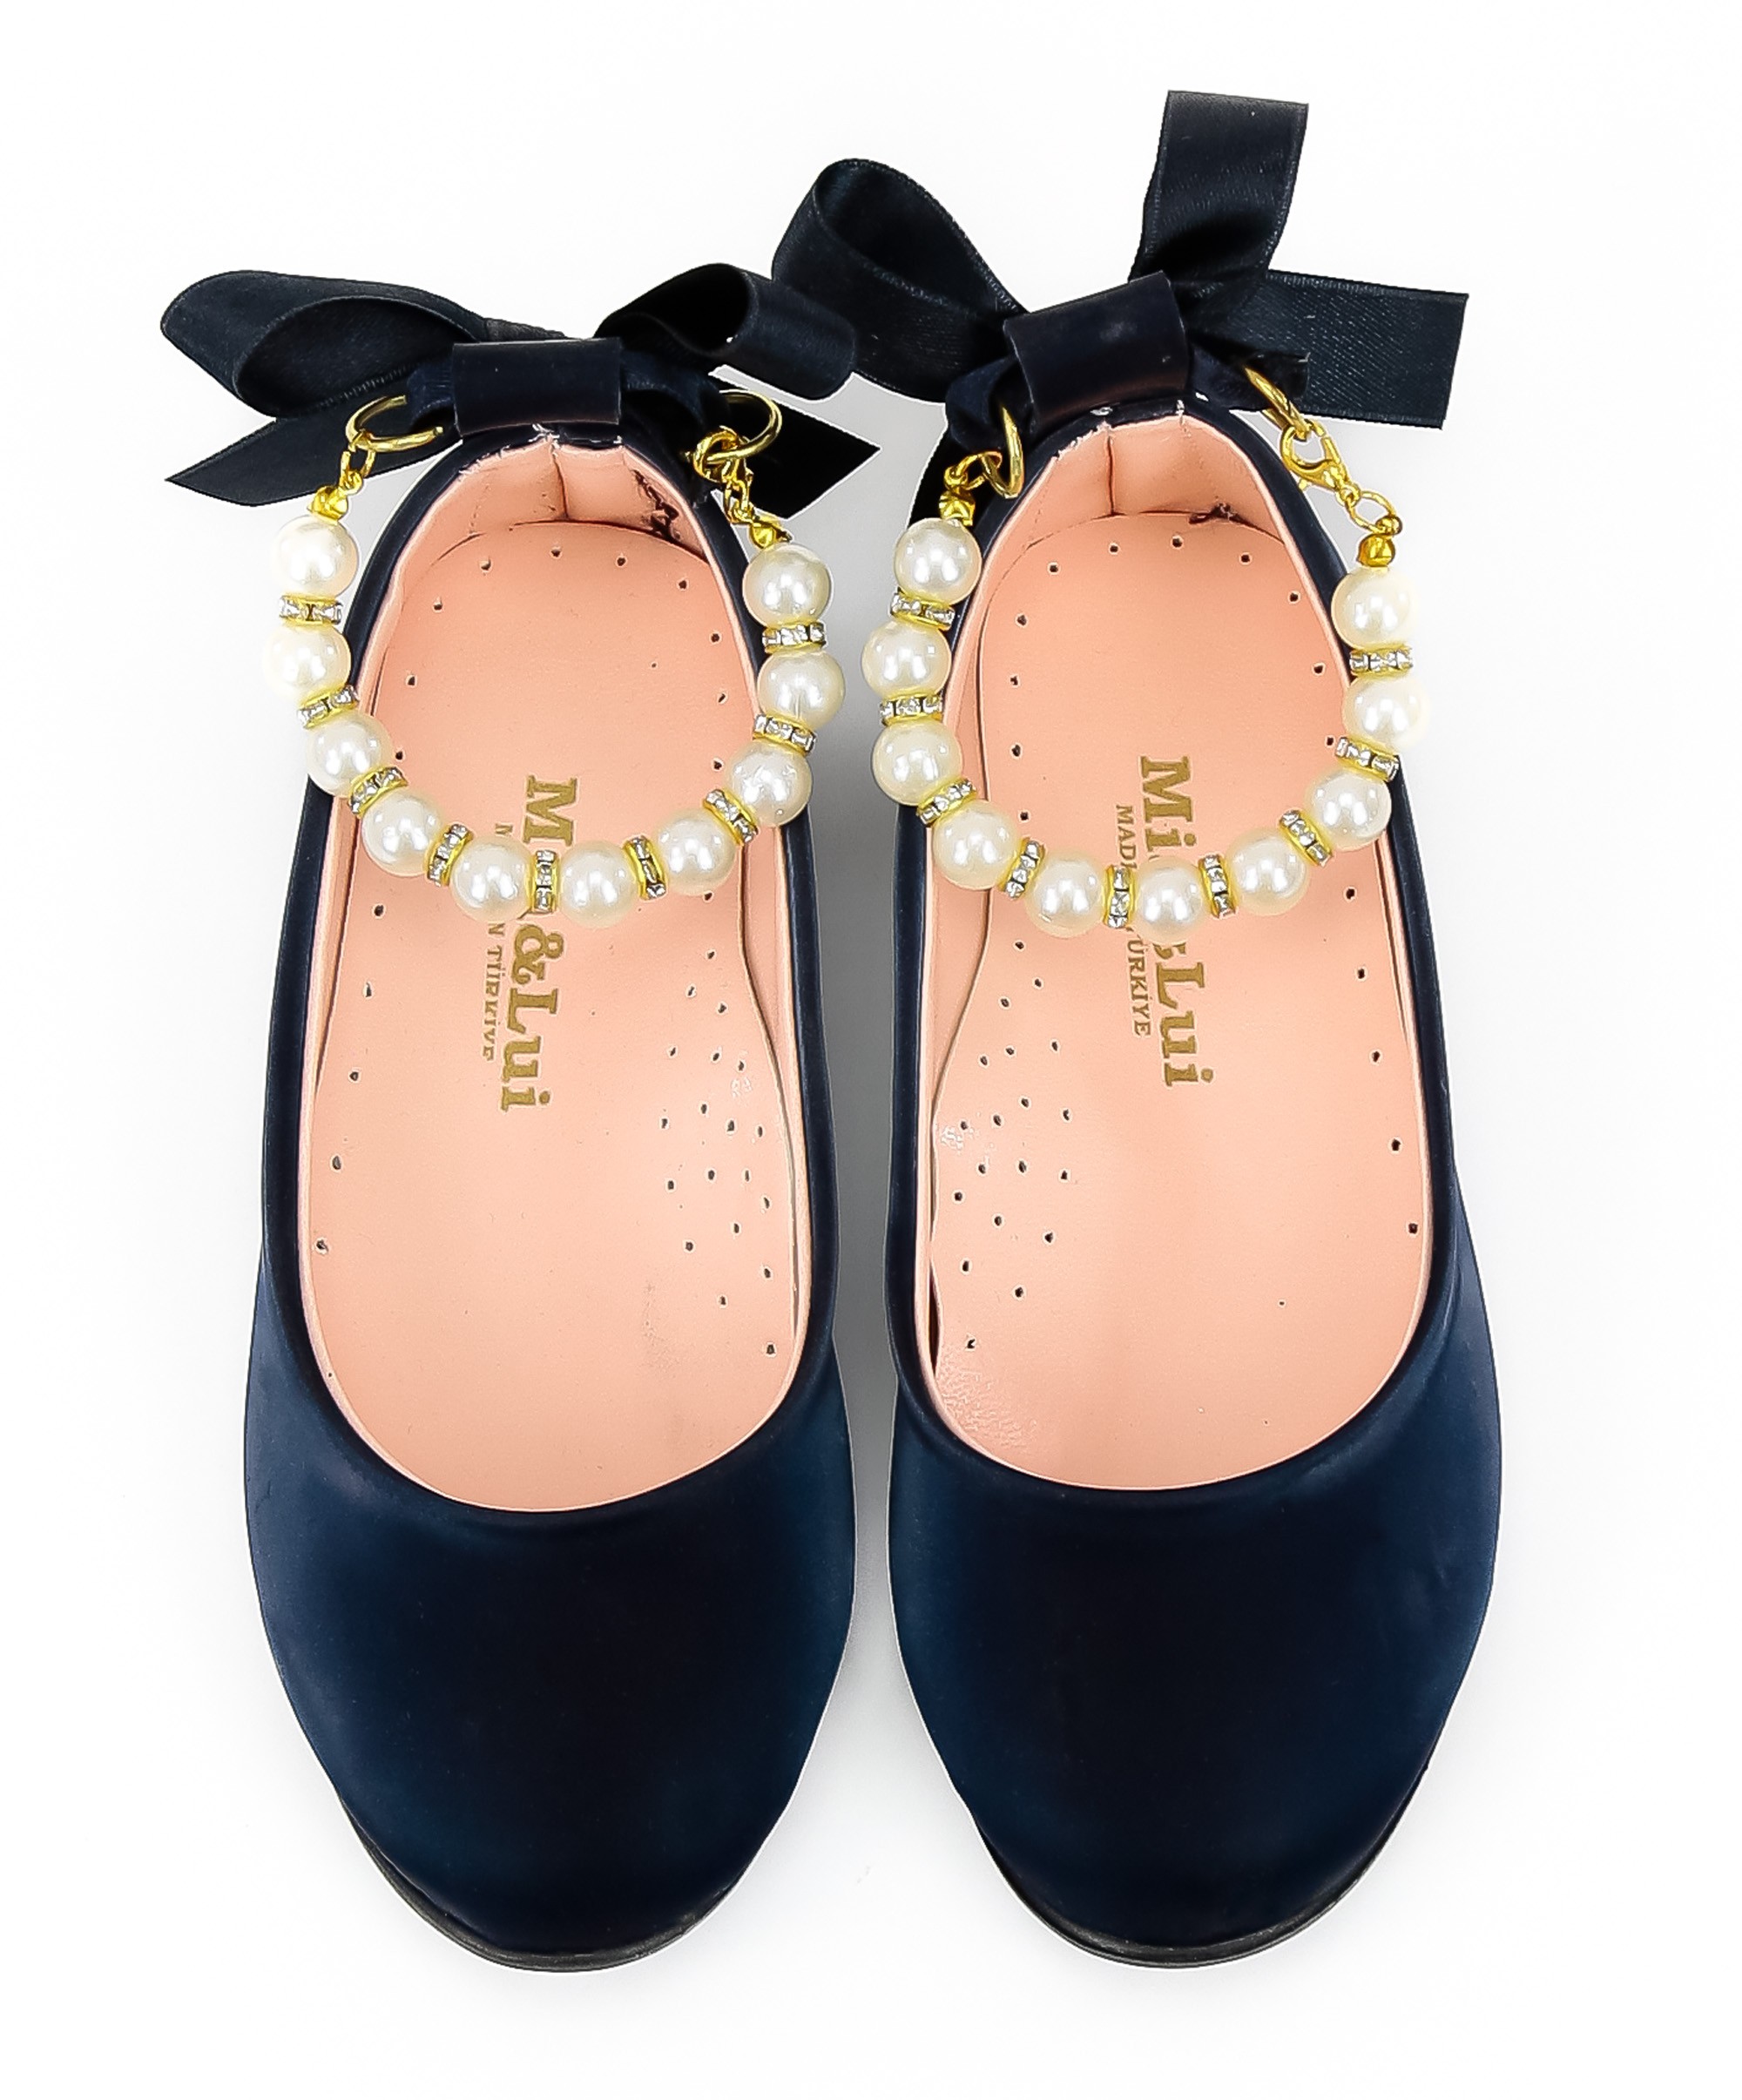 Girls Pearls Flat Mary Jane Shoes - ISABEL - Navy Blue